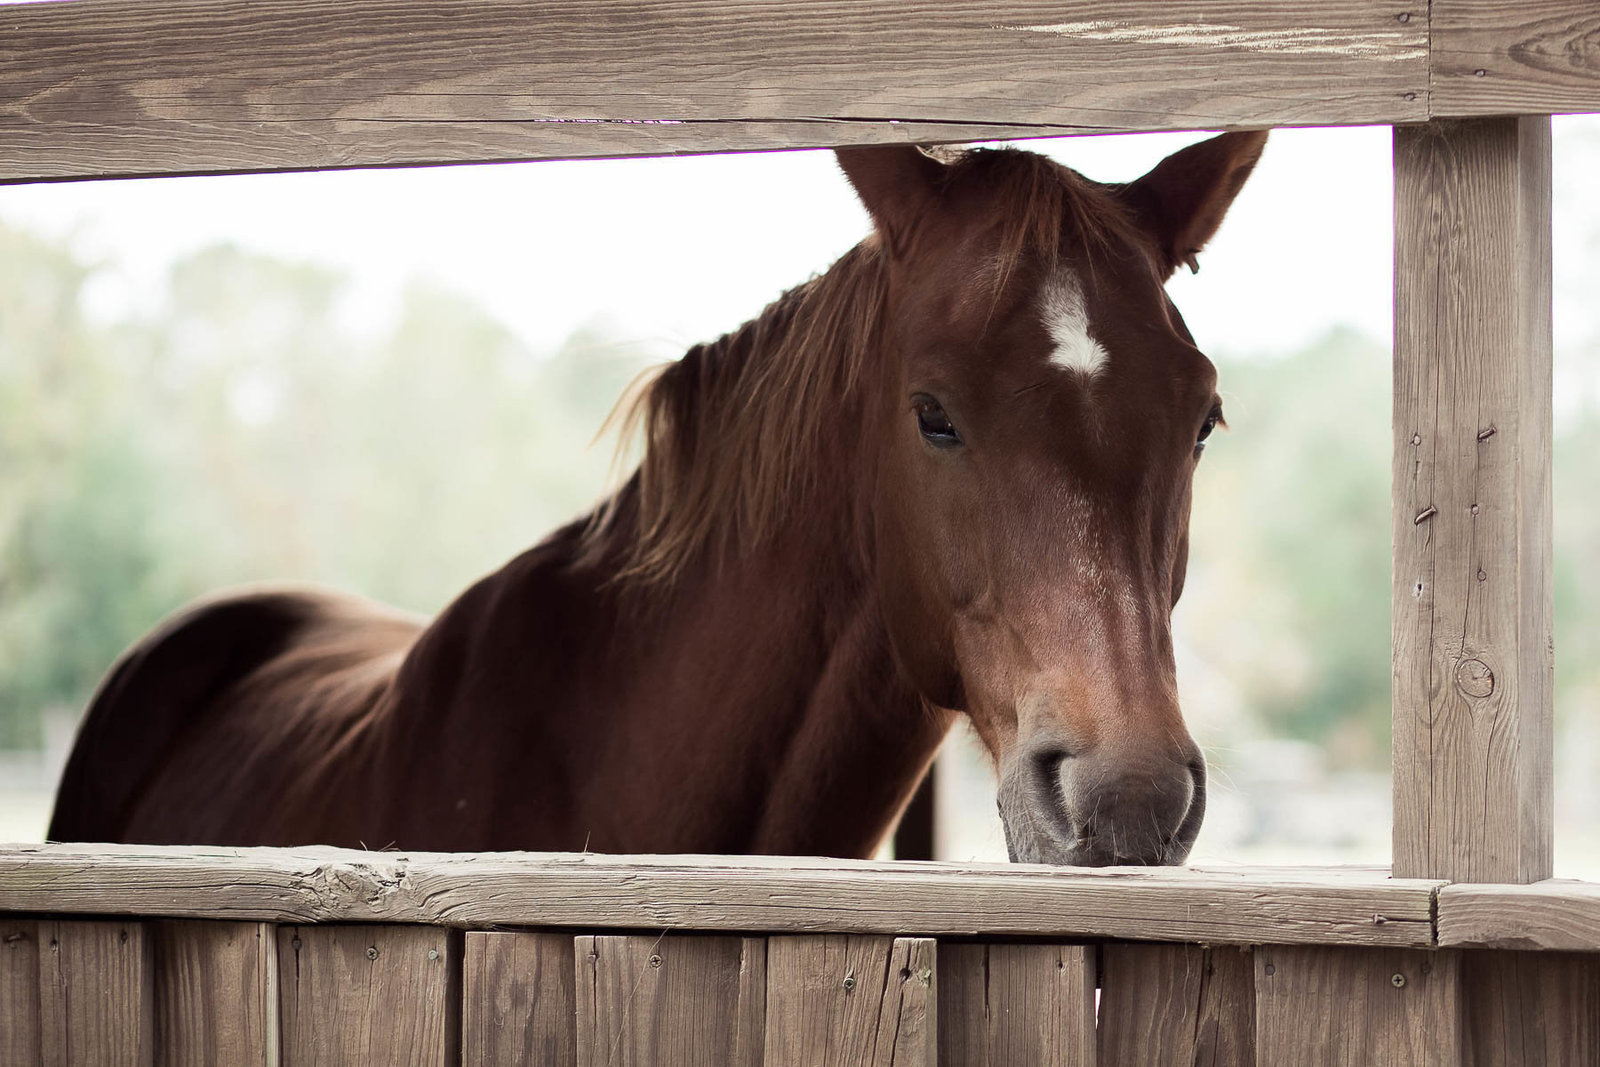 Horse stands in stable, Boals Farm, Charleston, South Carolina